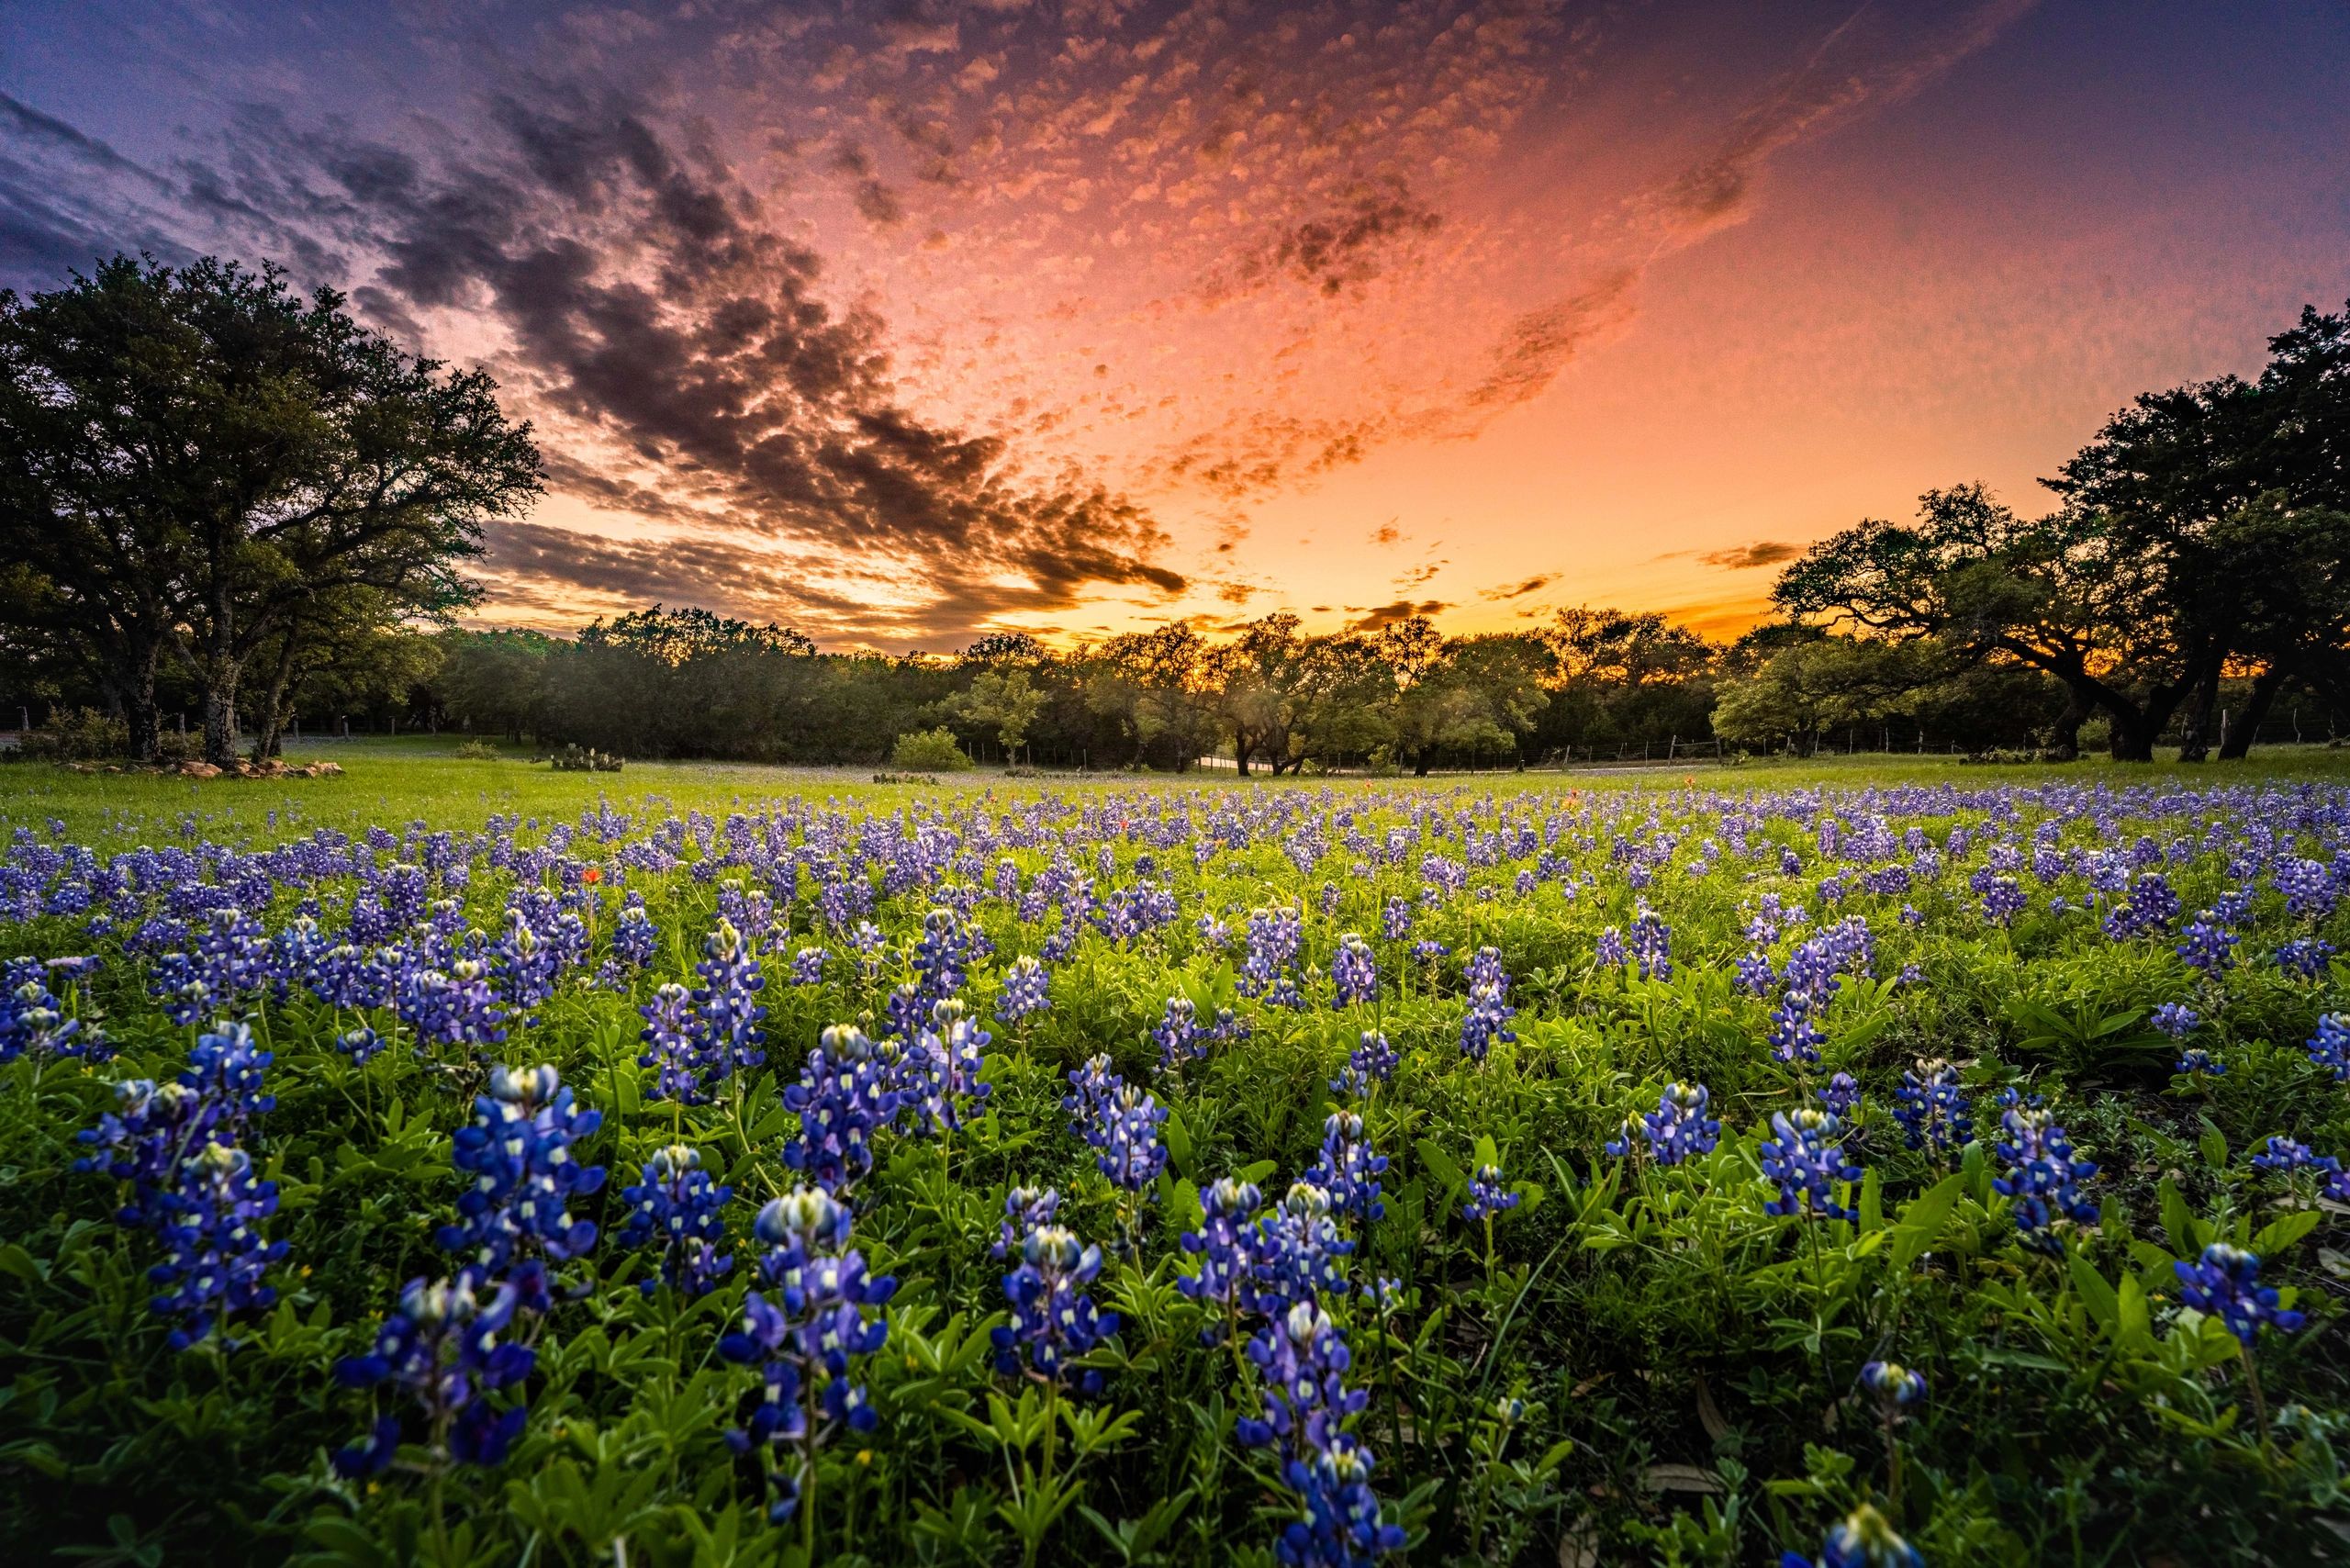 Bluebonnets at sunset on the ranch during wildflower season